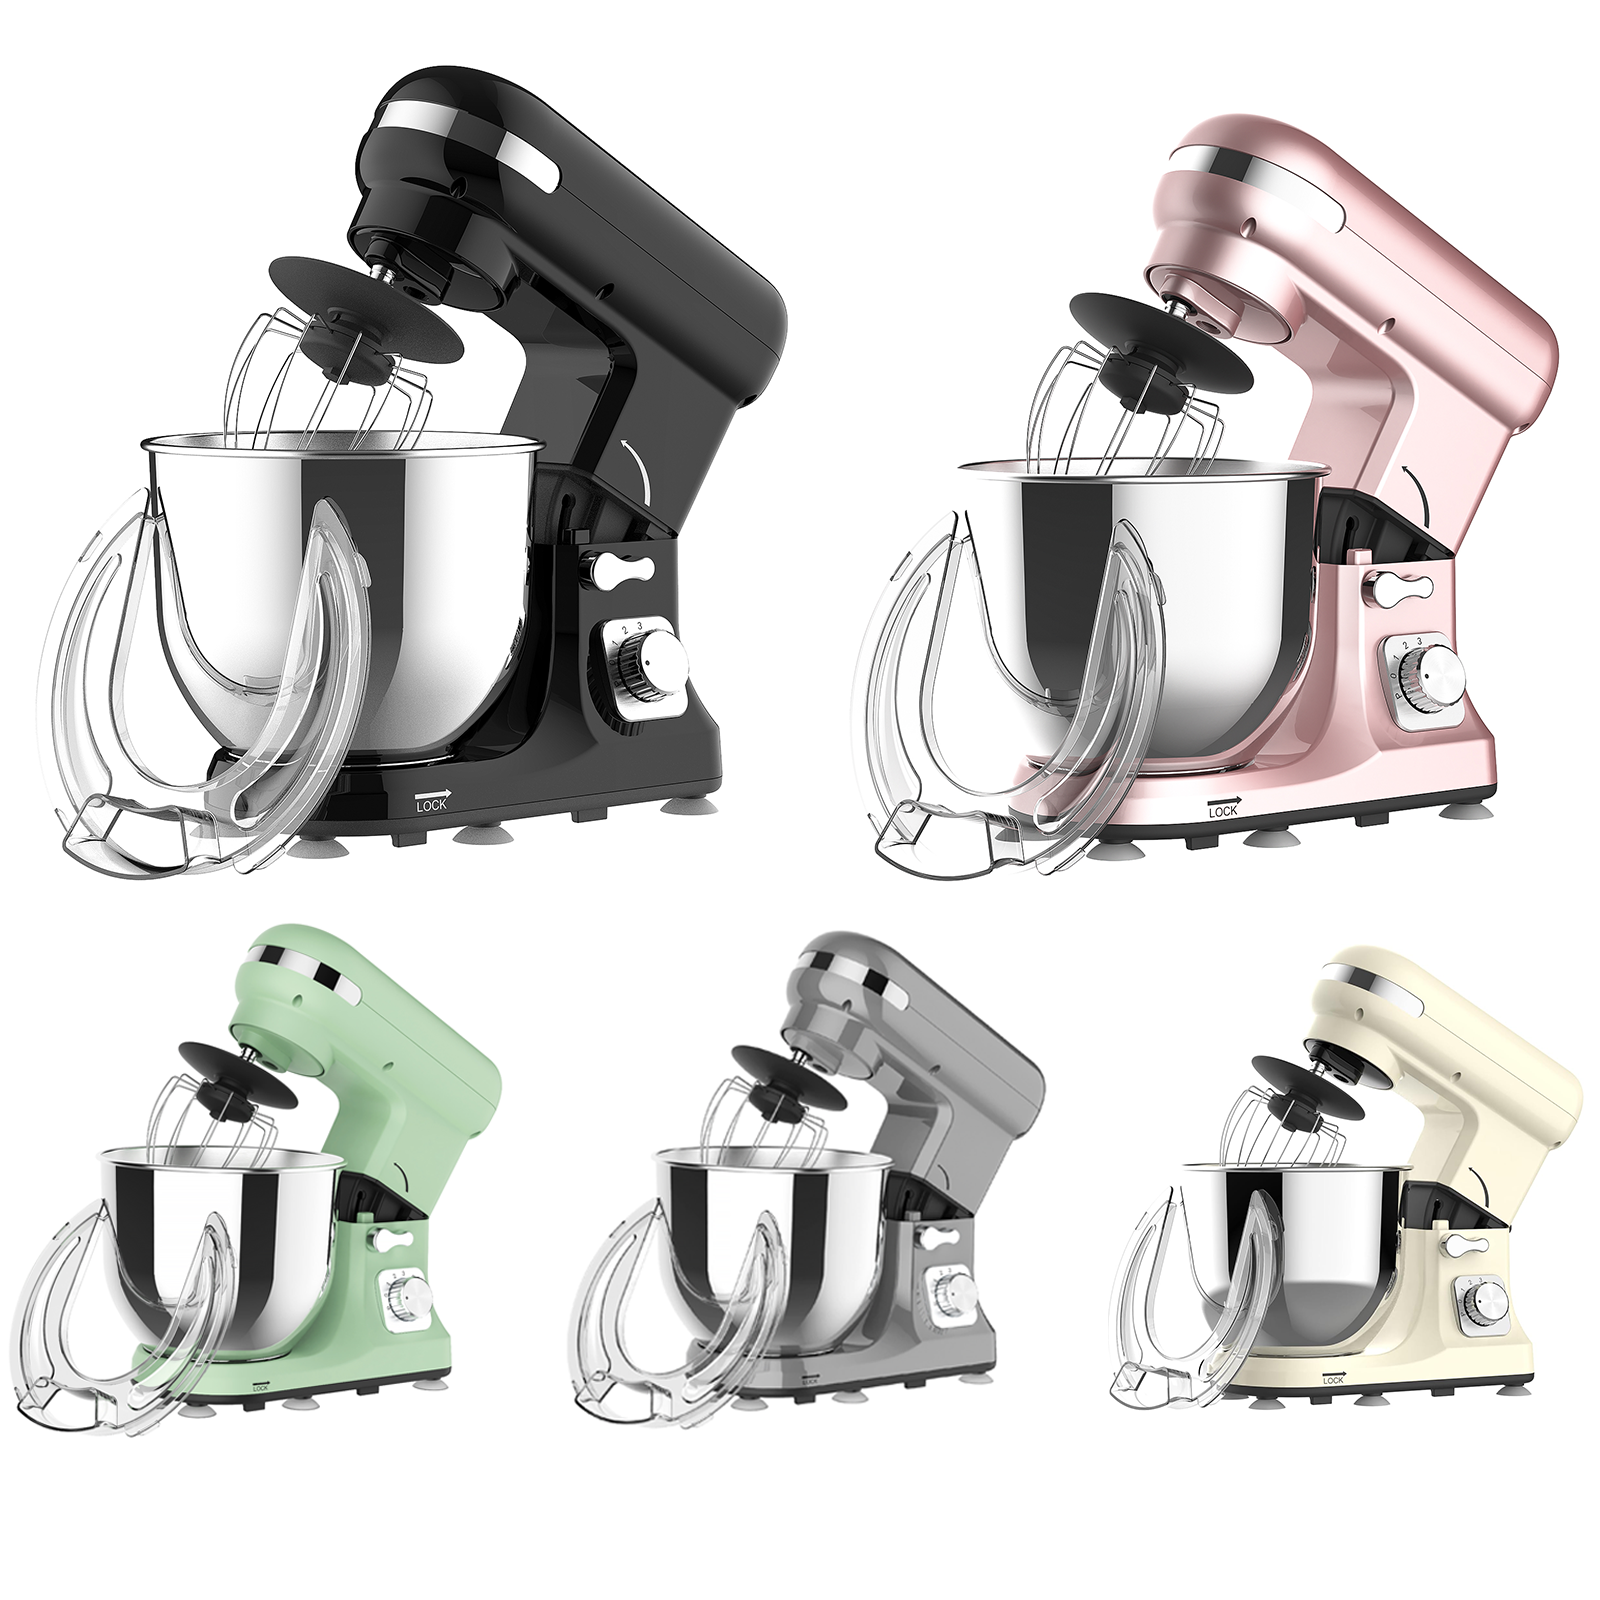 https://assets.mydeal.com.au/46392/6-speed-electric-stand-mixer-w-accessories-kitchen-machine-with-dough-hook-whisk-beater-10087681_00.jpg?v=638342877175817547